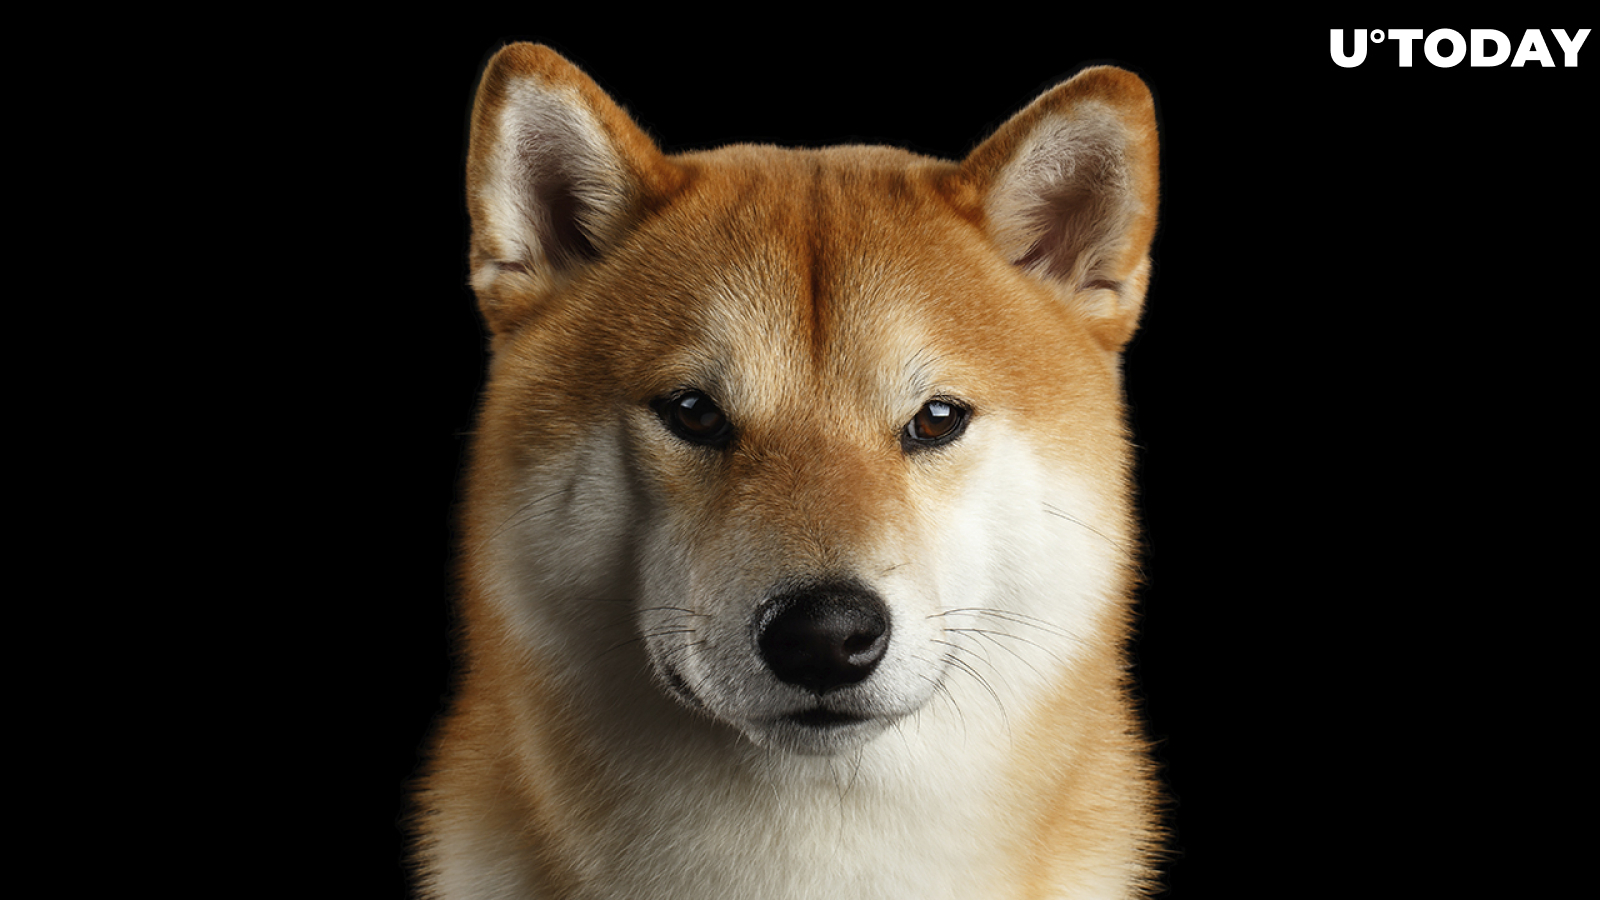 Shiba Inu Holders Increase in Number, Price Nears Historic "Buying" Zone